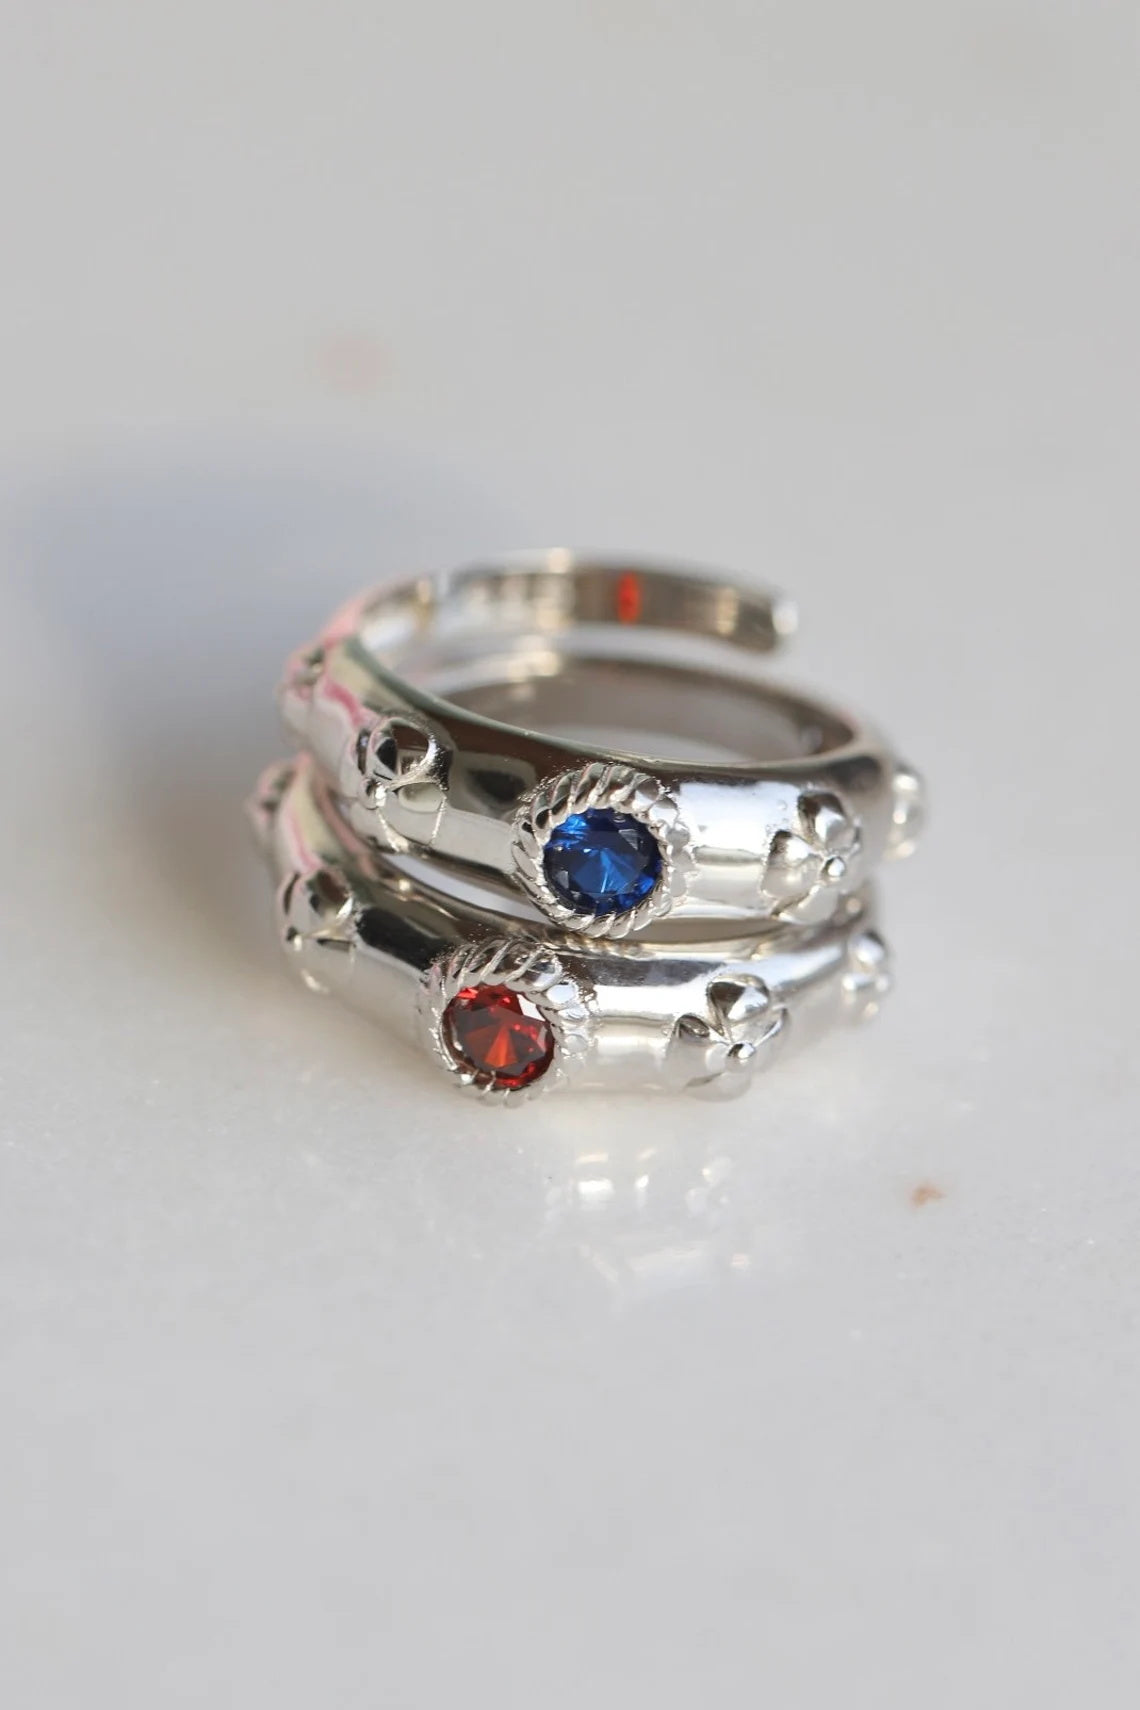 Moving Castle Ring, Red Gem Ring, Blue Gem Ring, Couple Ring Set, Cosplay Rings, Cosplay Accessory, Anime Rings, Howl Rings Set, Sophie Ring